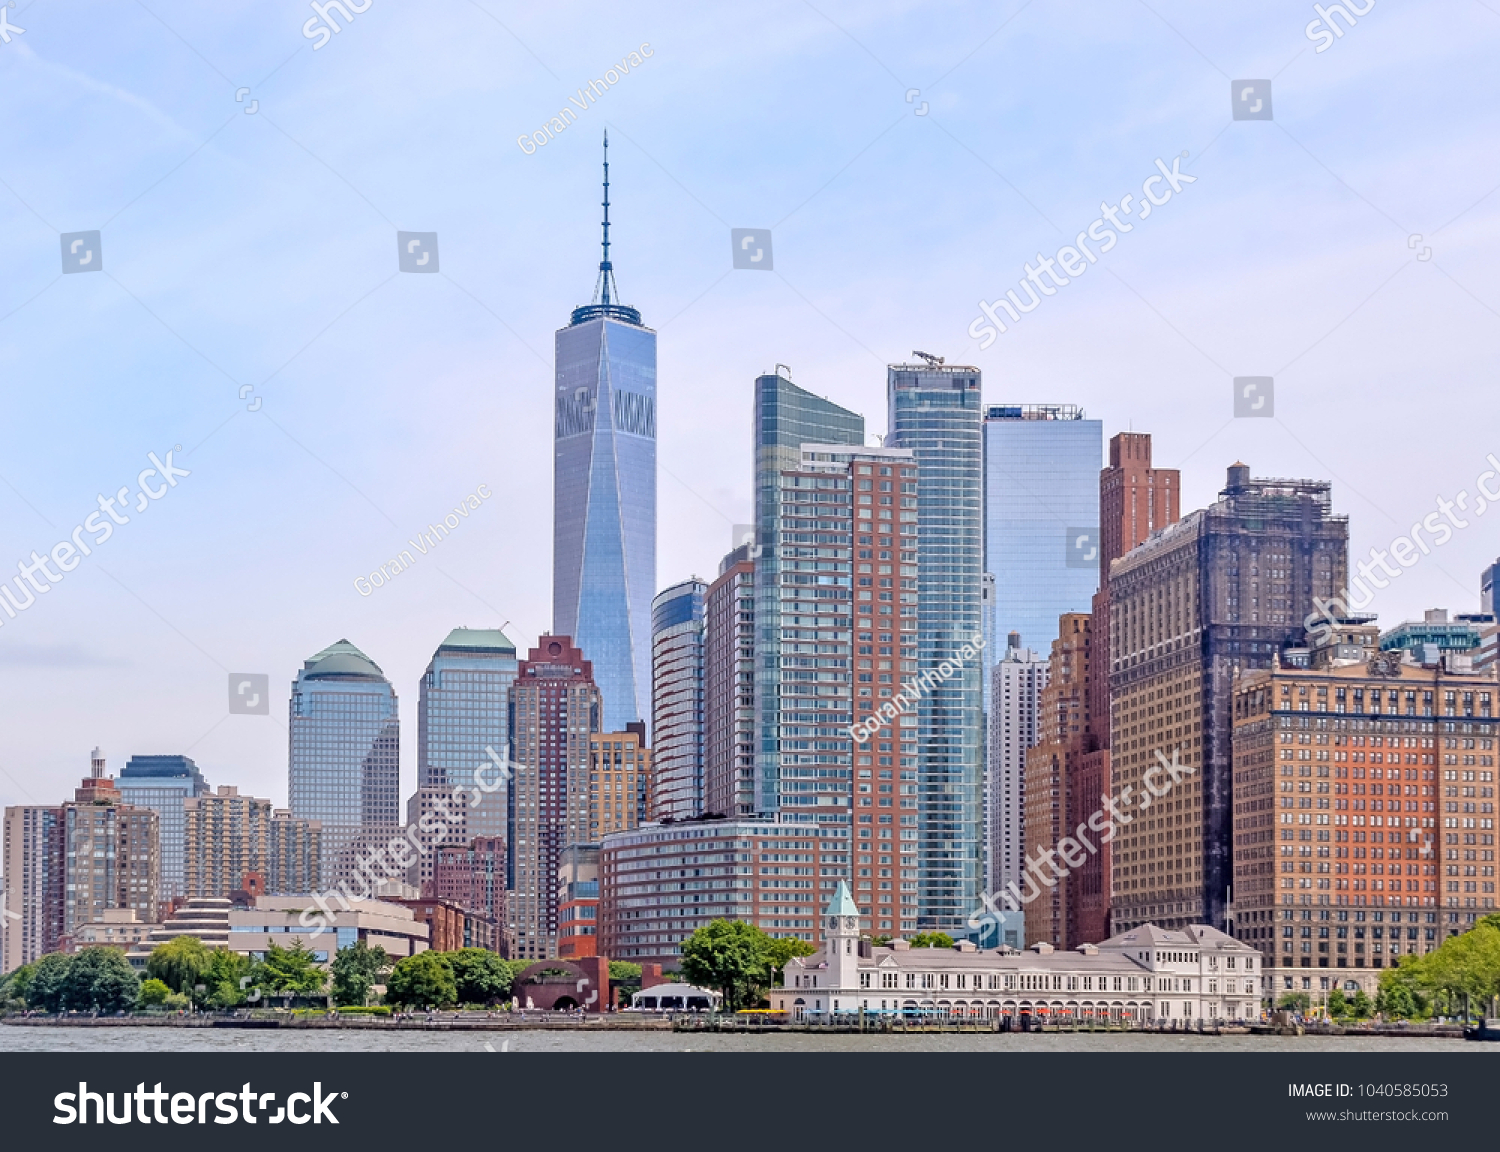 NEW YORK CITY, USA, May 28 2017: One World Trade Centre and sourunding buildings viewed from Hudson river in New York City, USA.  #1040585053